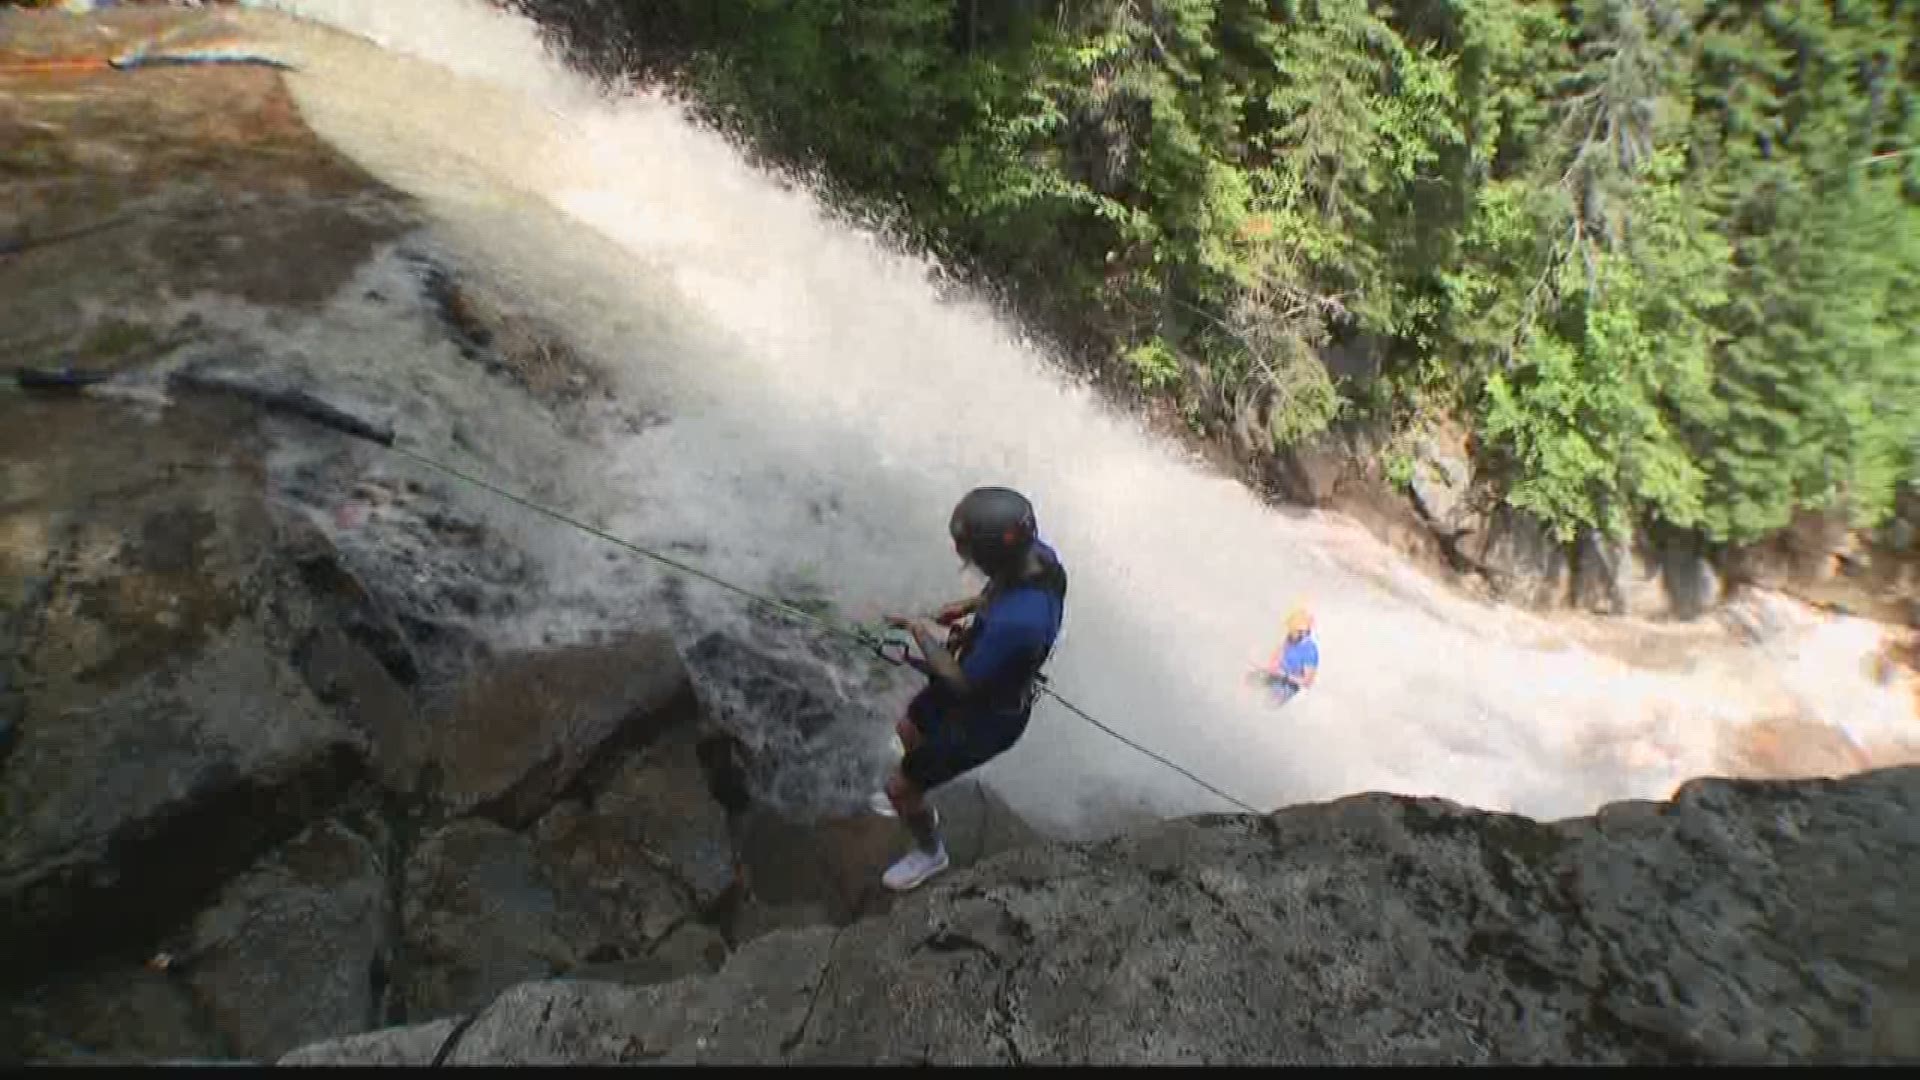 Rappelling down waterfalls in Crawford Notch